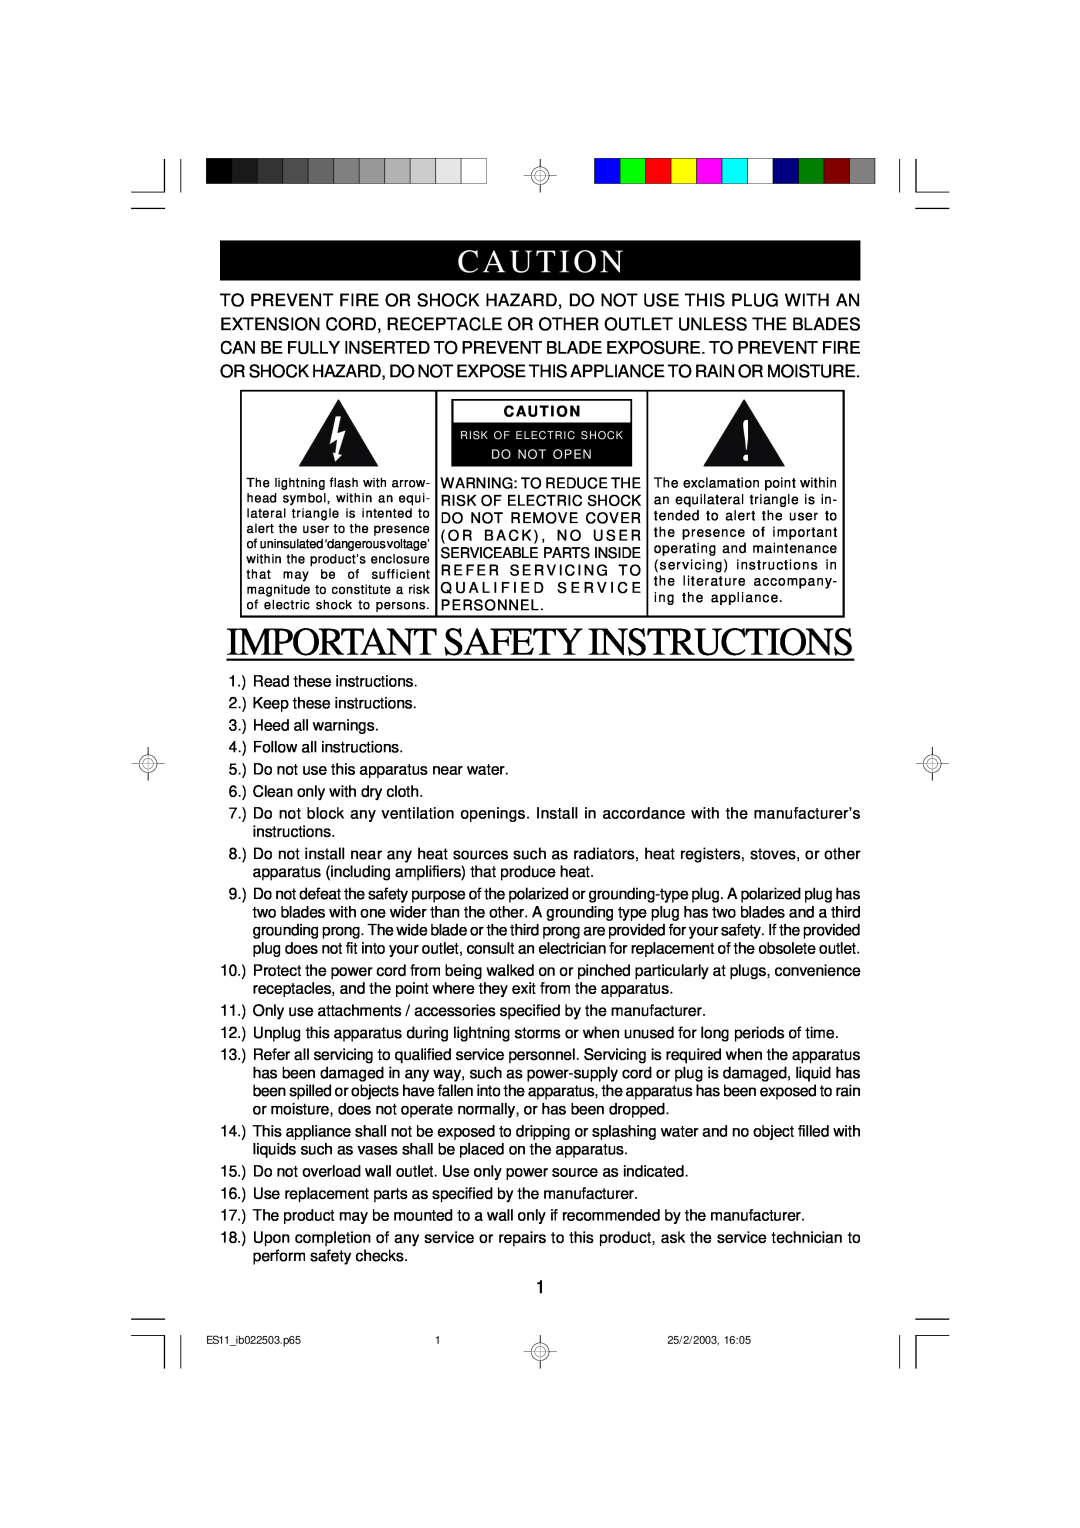 Emerson ES11 owner manual Important Safety Instructions, Caut I On, Caut I O N 